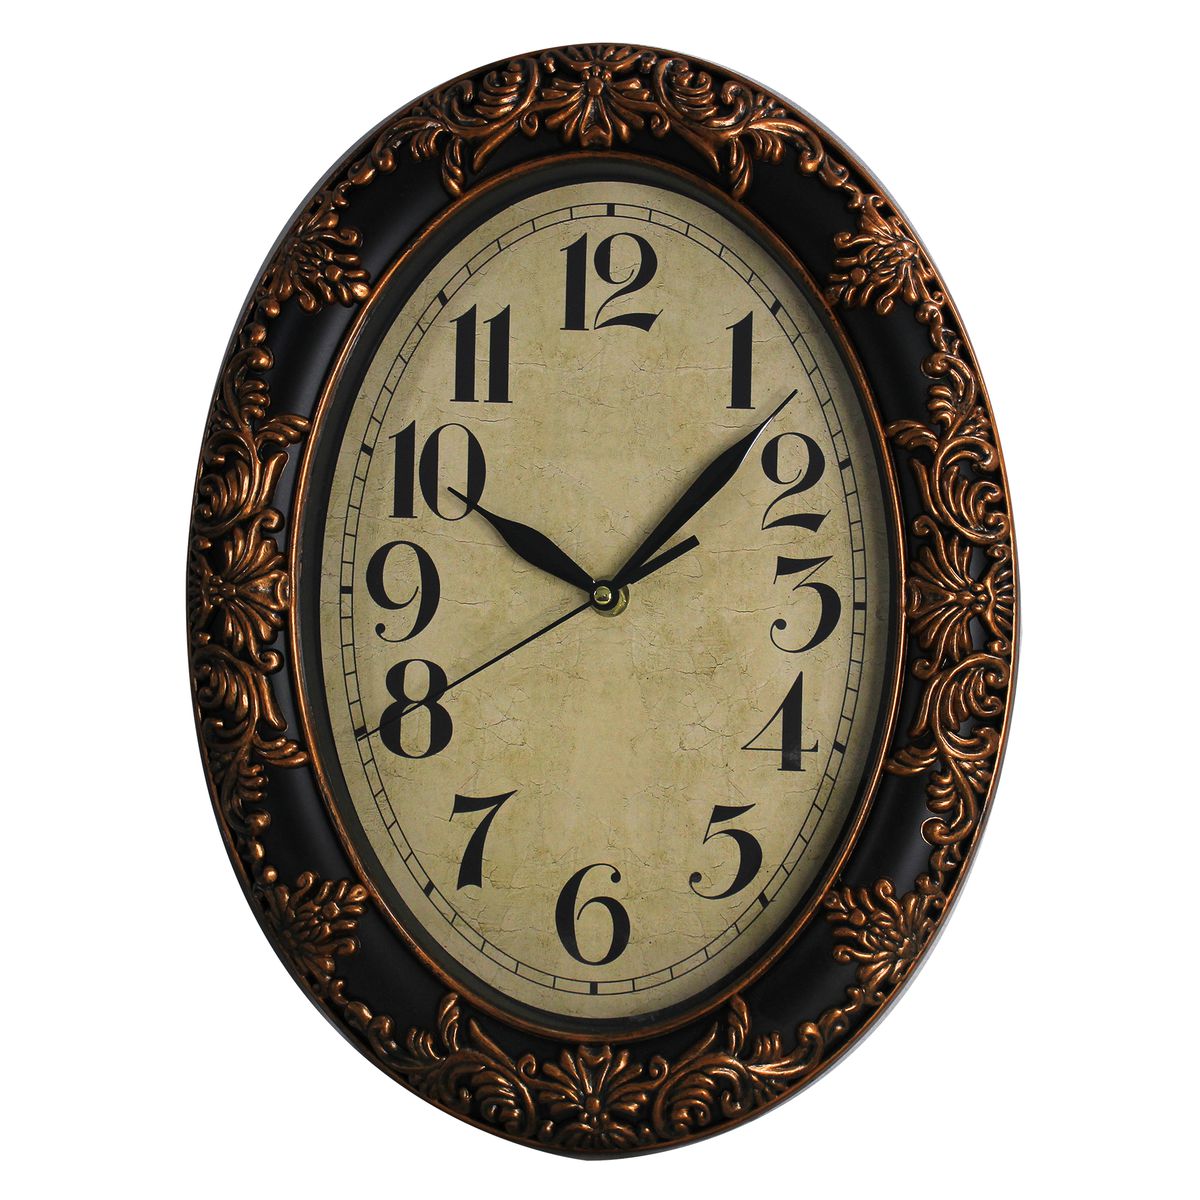 Ornate Border 34x26cm Oval Analogue Wall Clock with Anrique Motif - 012